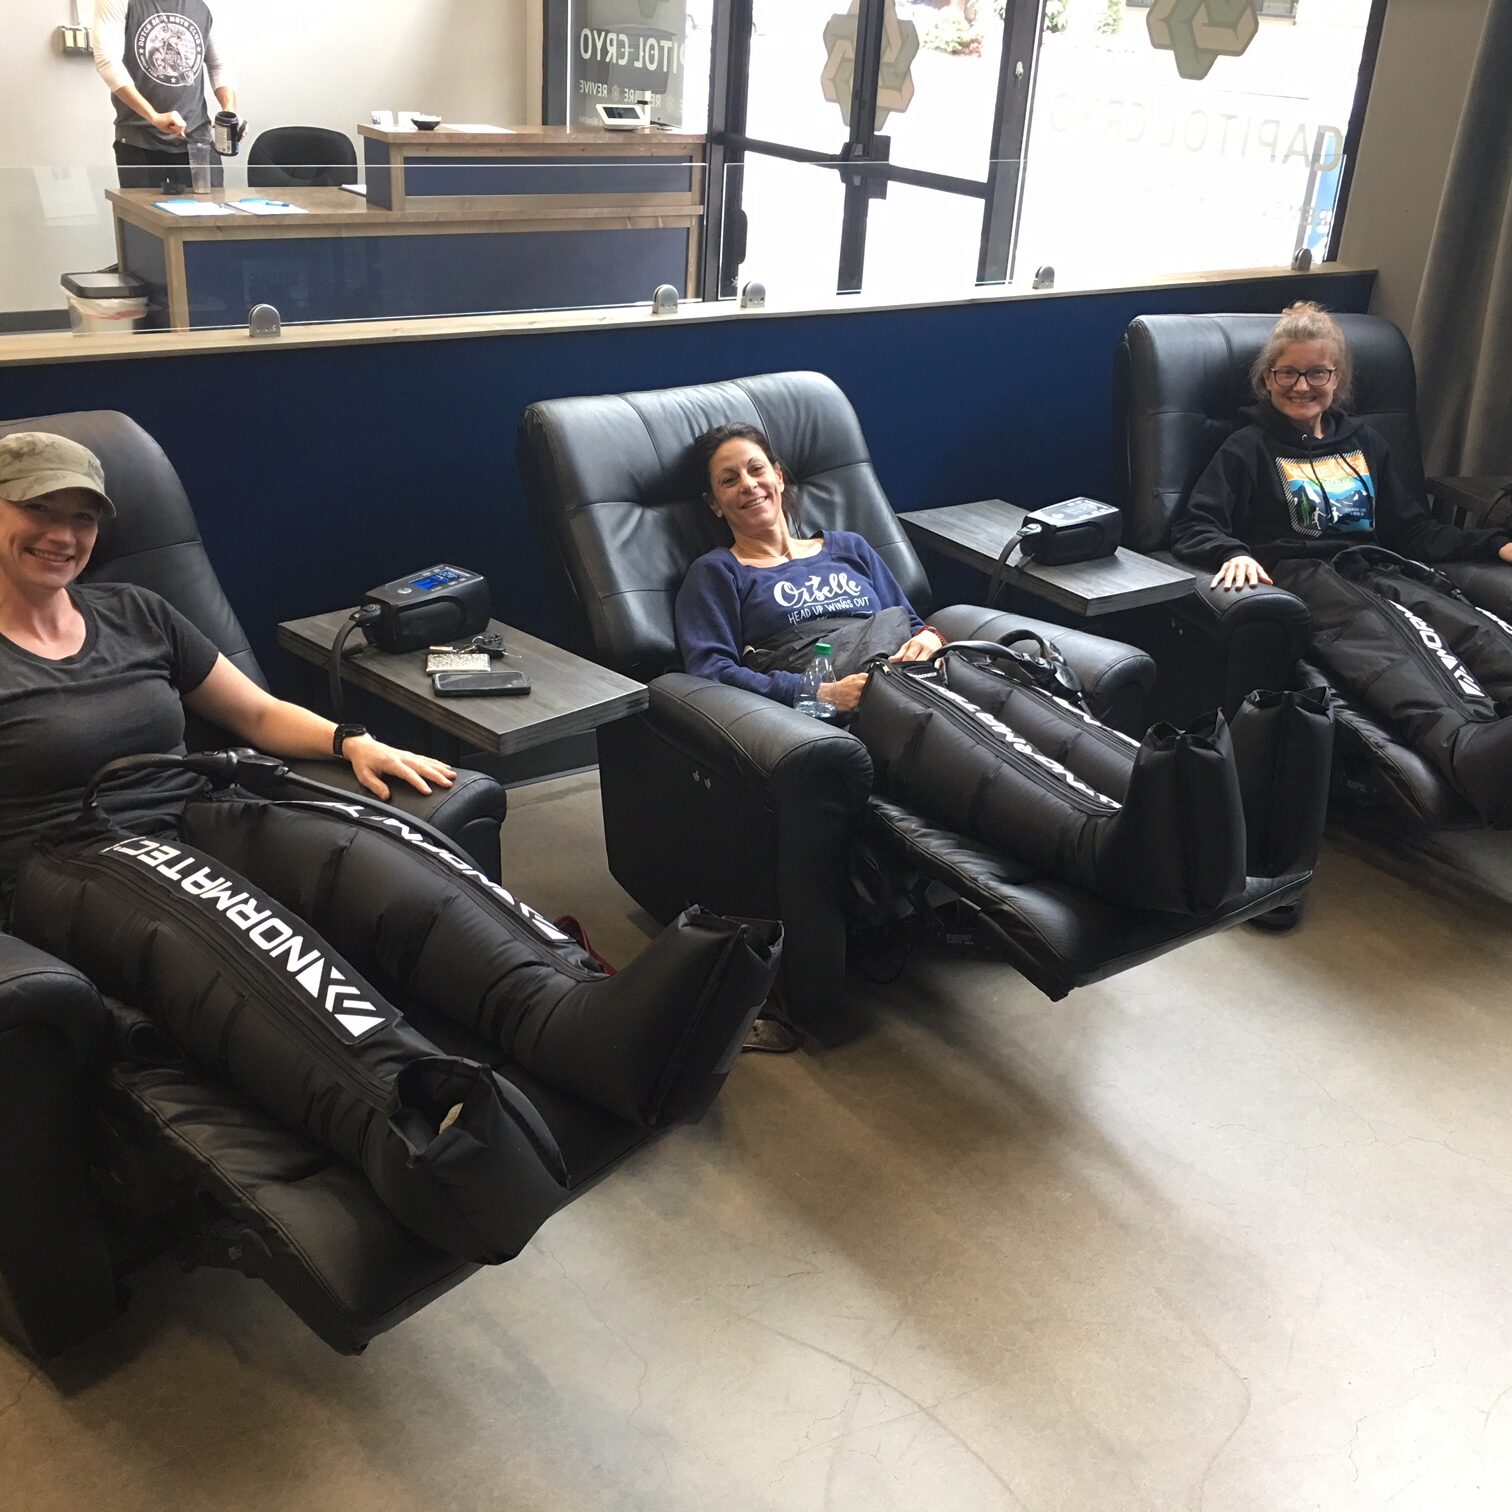 NormaTec is the leader in rapid recovery—NormaTec gives a competitive edge to the world’s elite athletes, coaches, and trainers. Our goal at Capitol Cryo is to establish recovery as an integral part of every athlete’s training, and we feel NormaTec systems are the best way to accomplish that.  The NormaTec PULSE Recovery Systems are dynamic compression devices designed for recovery and rehab. All of our systems use NormaTec's patented PULSE technology to help athletes recover faster between trainings and after performance. Call for an appointment or schedule online! 971-301-2796